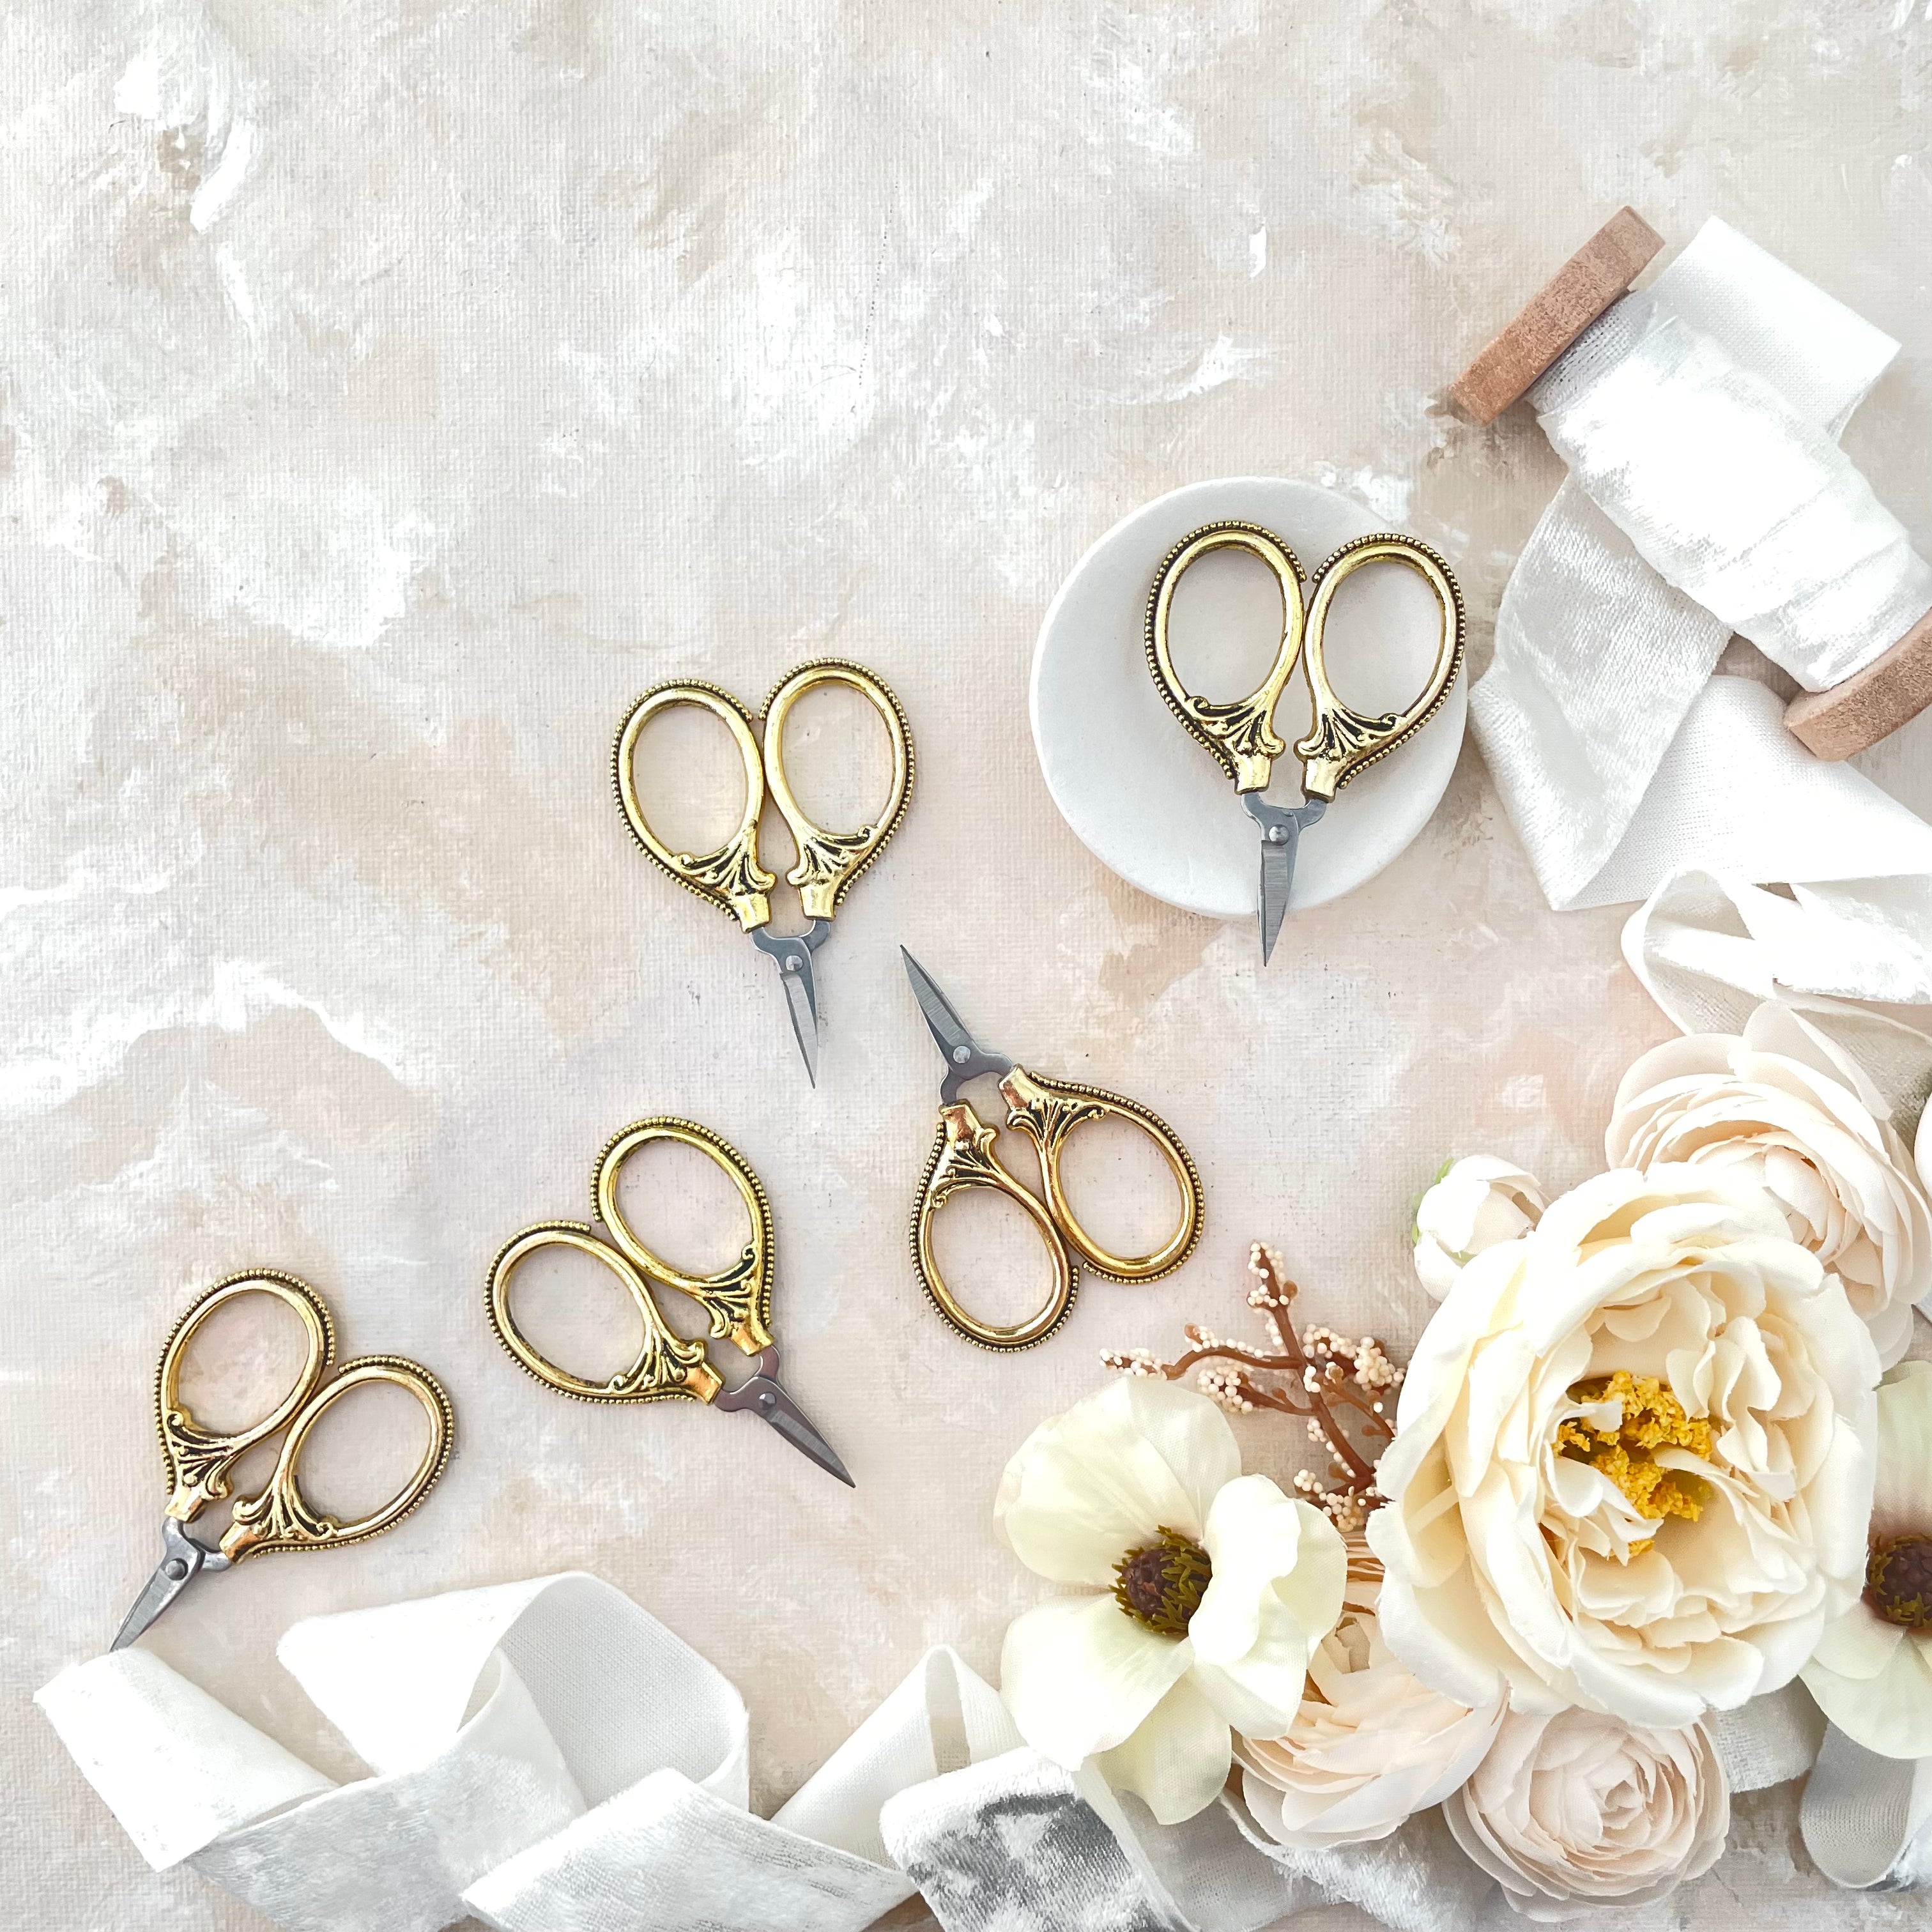 Mini GOLD Scissors: 2 ¼” long x 1 ⅝” at widest point -  Wedding Flat lay props from Champagne & GRIT